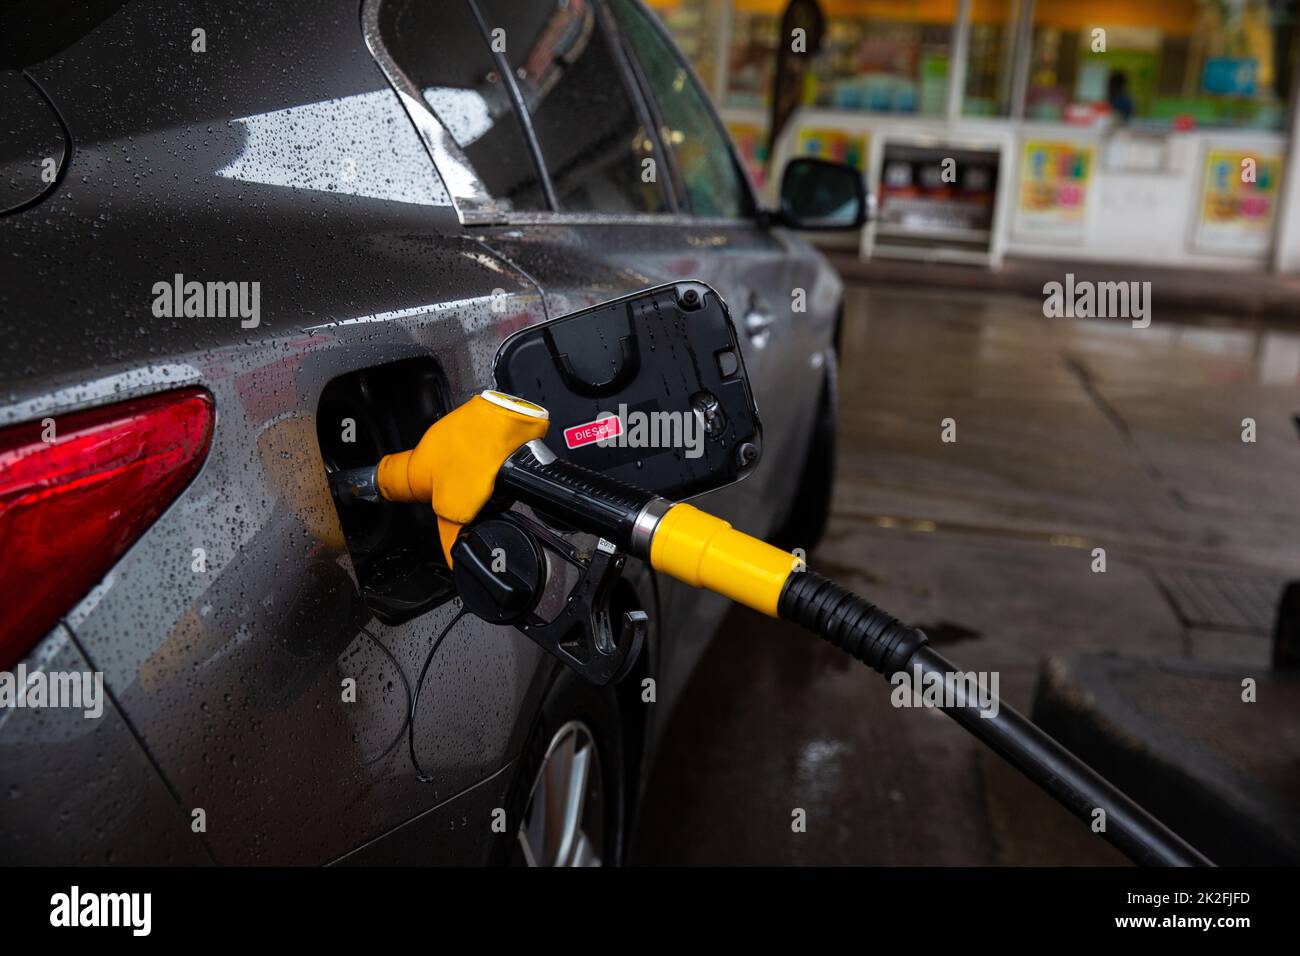 The car is refueling at the gas station. Refueling automobile with gasoline or diesel with a fuel dispenser. Fuel busines Stock Photo